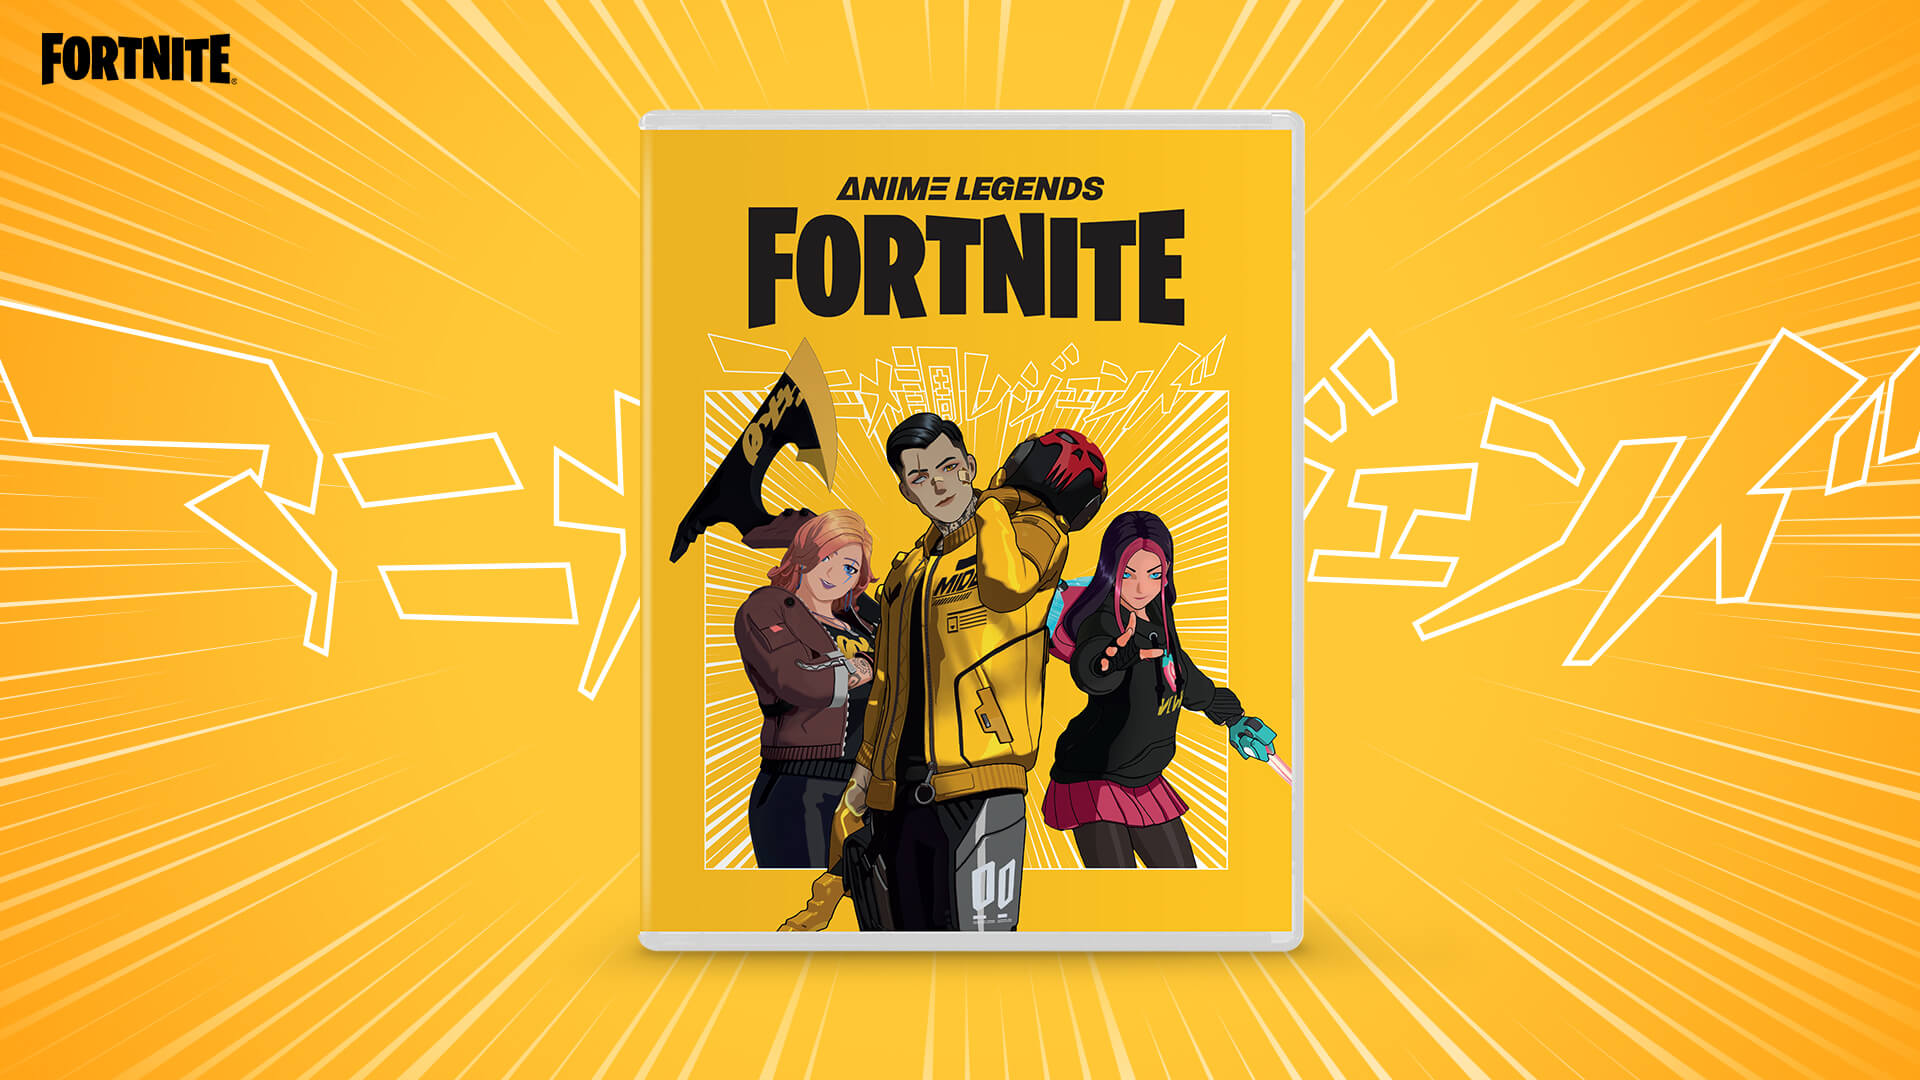 Fortnite Anime Legends Pack: Release Date, Price, Contents